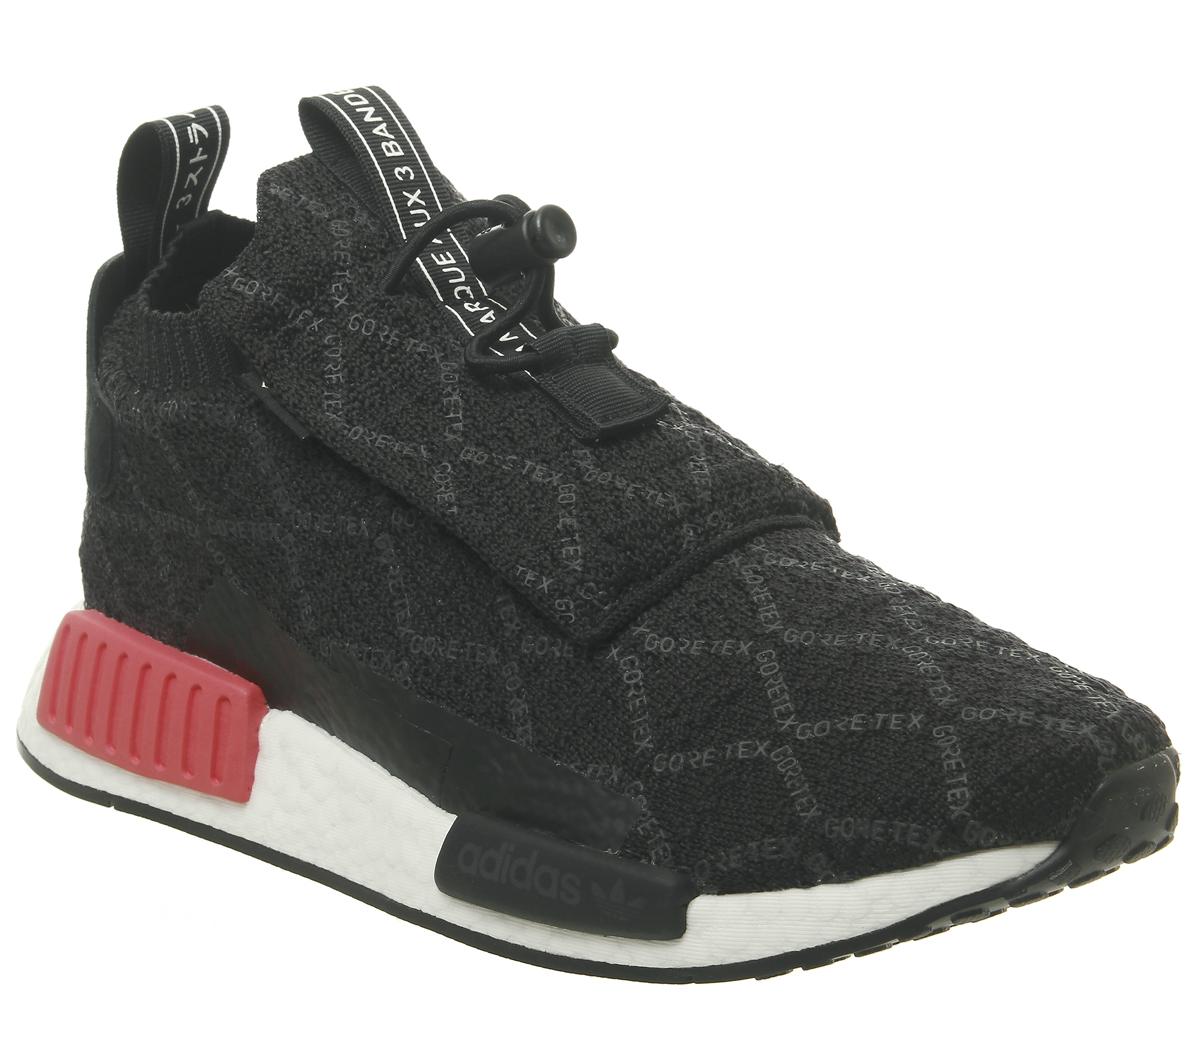 gore tex nmd